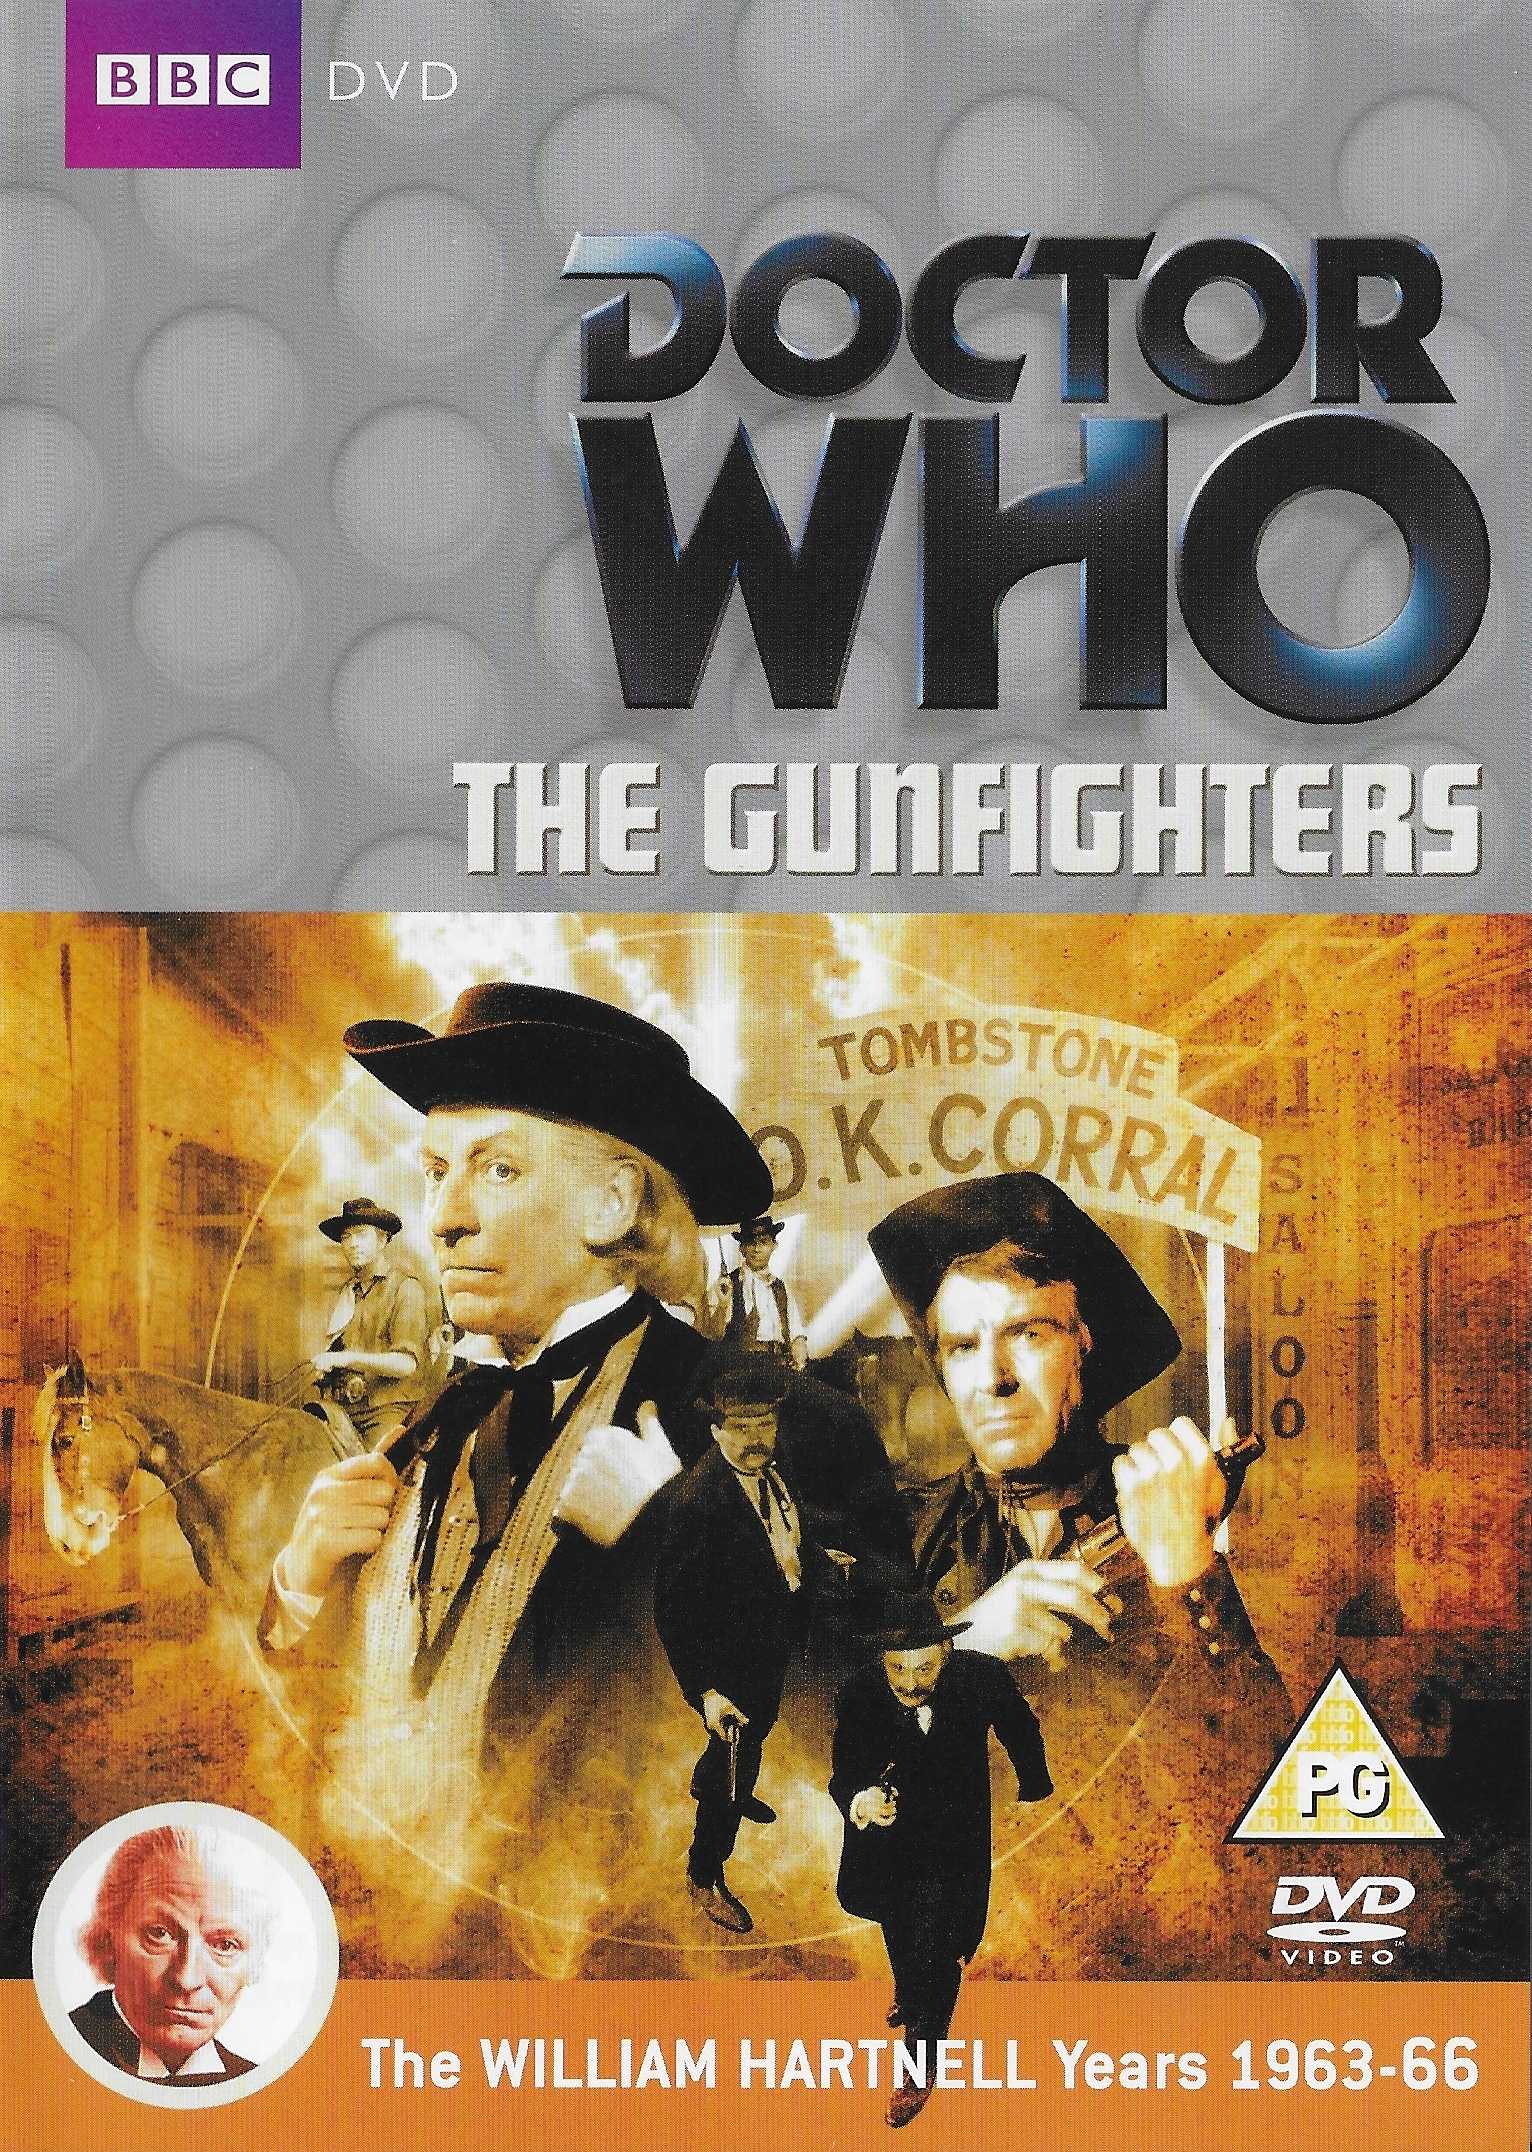 Picture of BBCDVD 3380A Doctor Who - The gunfighters by artist Donald Cotton from the BBC dvds - Records and Tapes library